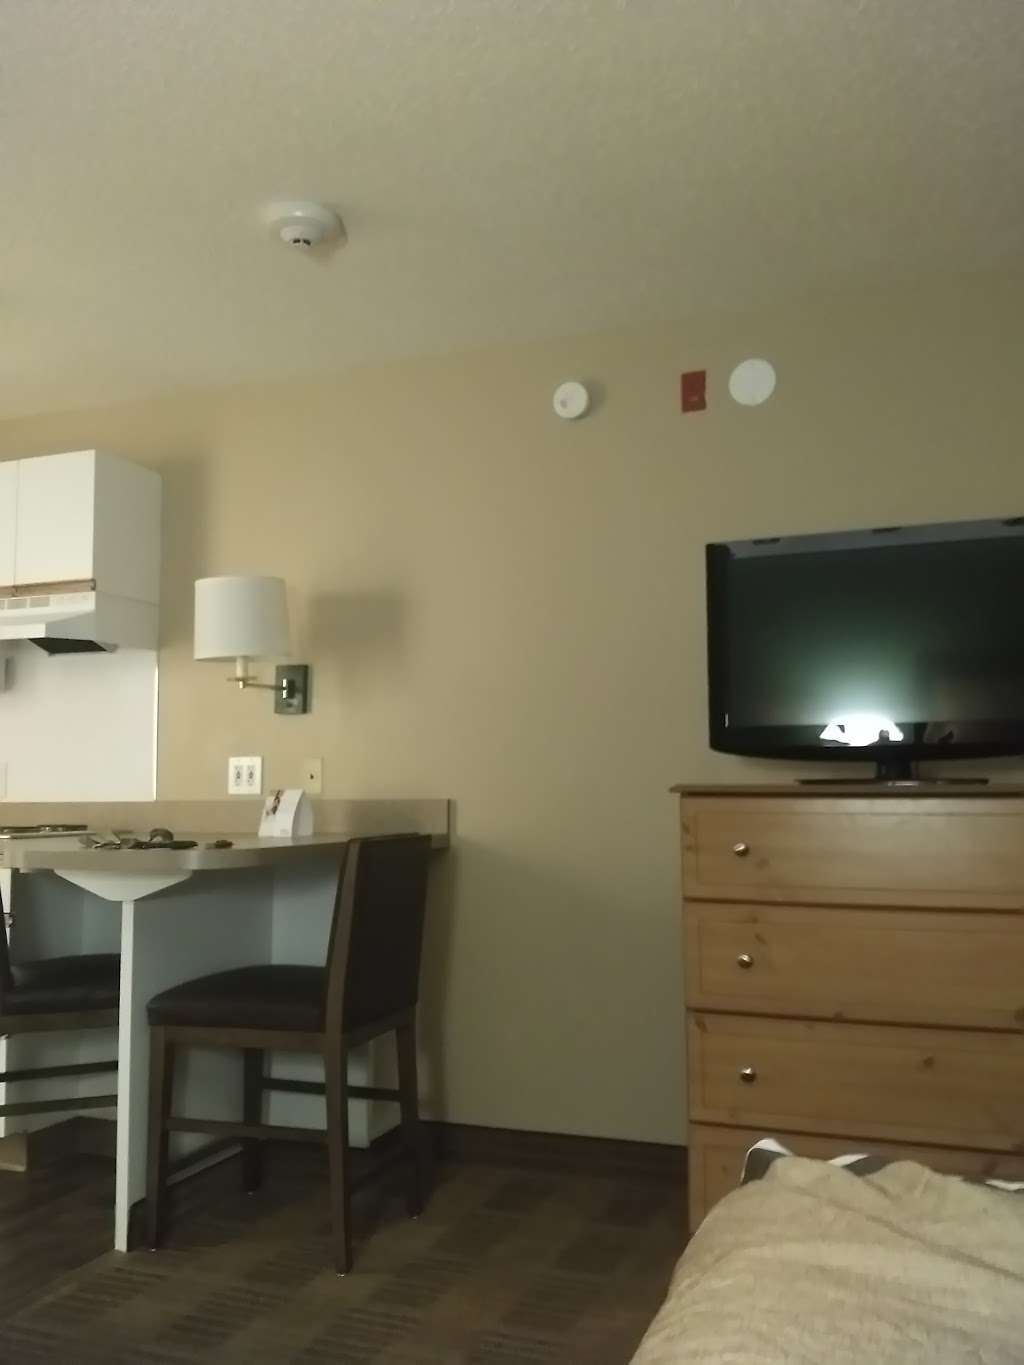 Extended Stay America - Washington D.C - Rockville | 2621 Research Blvd, Rockville, MD 20850 | Phone: (301) 987-9100